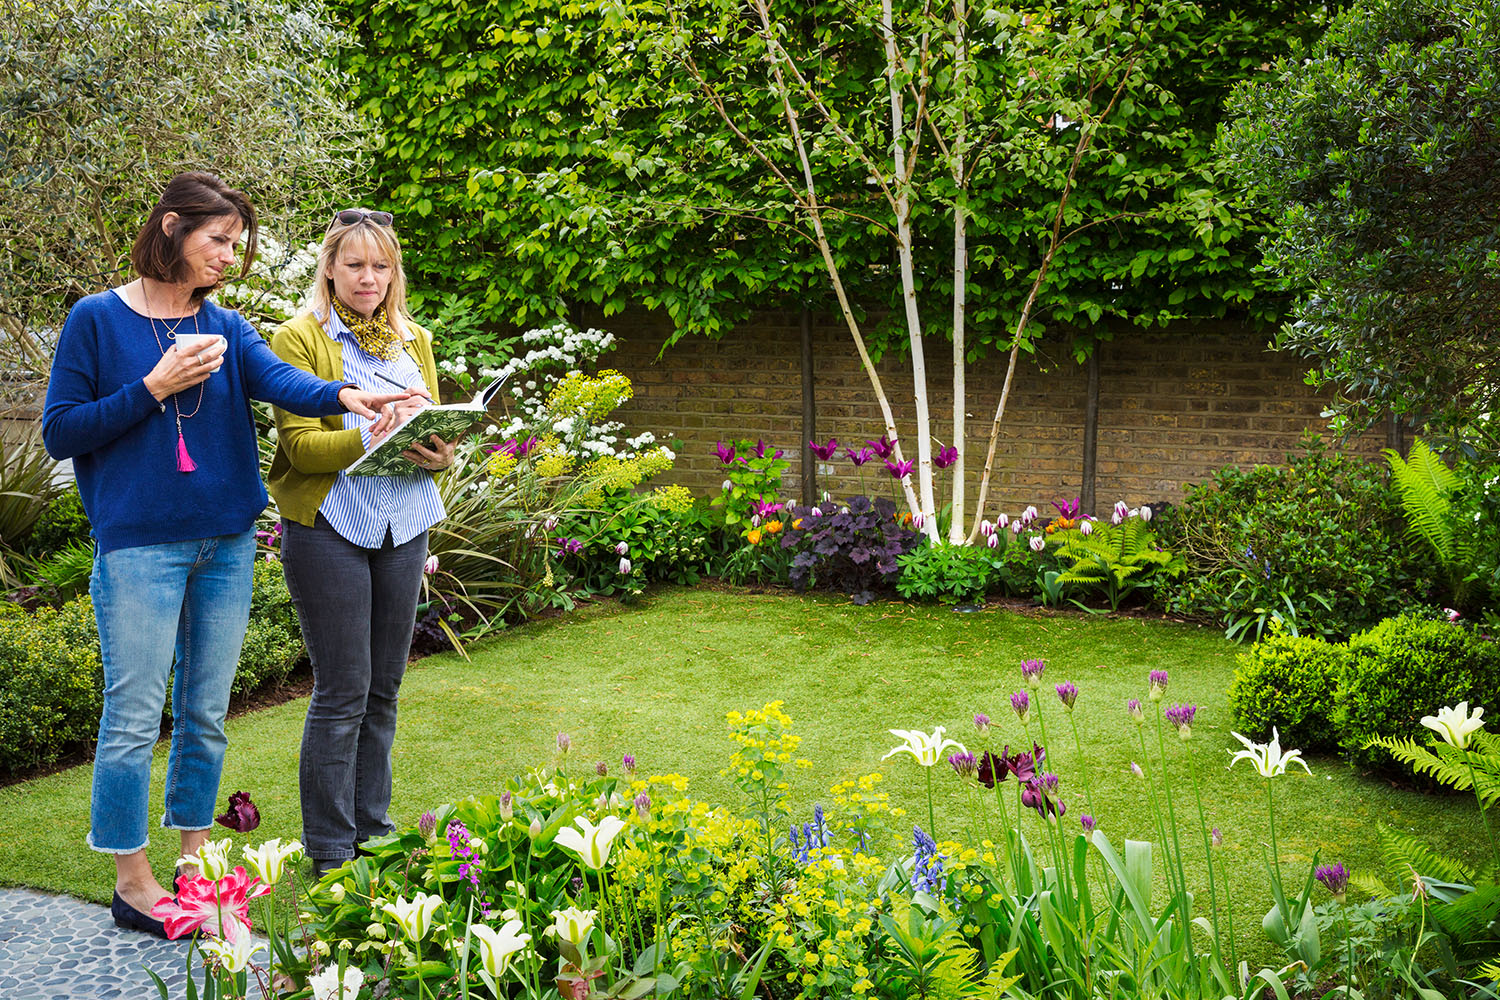 6 Aspects to Consider when Landscaping Your Garden